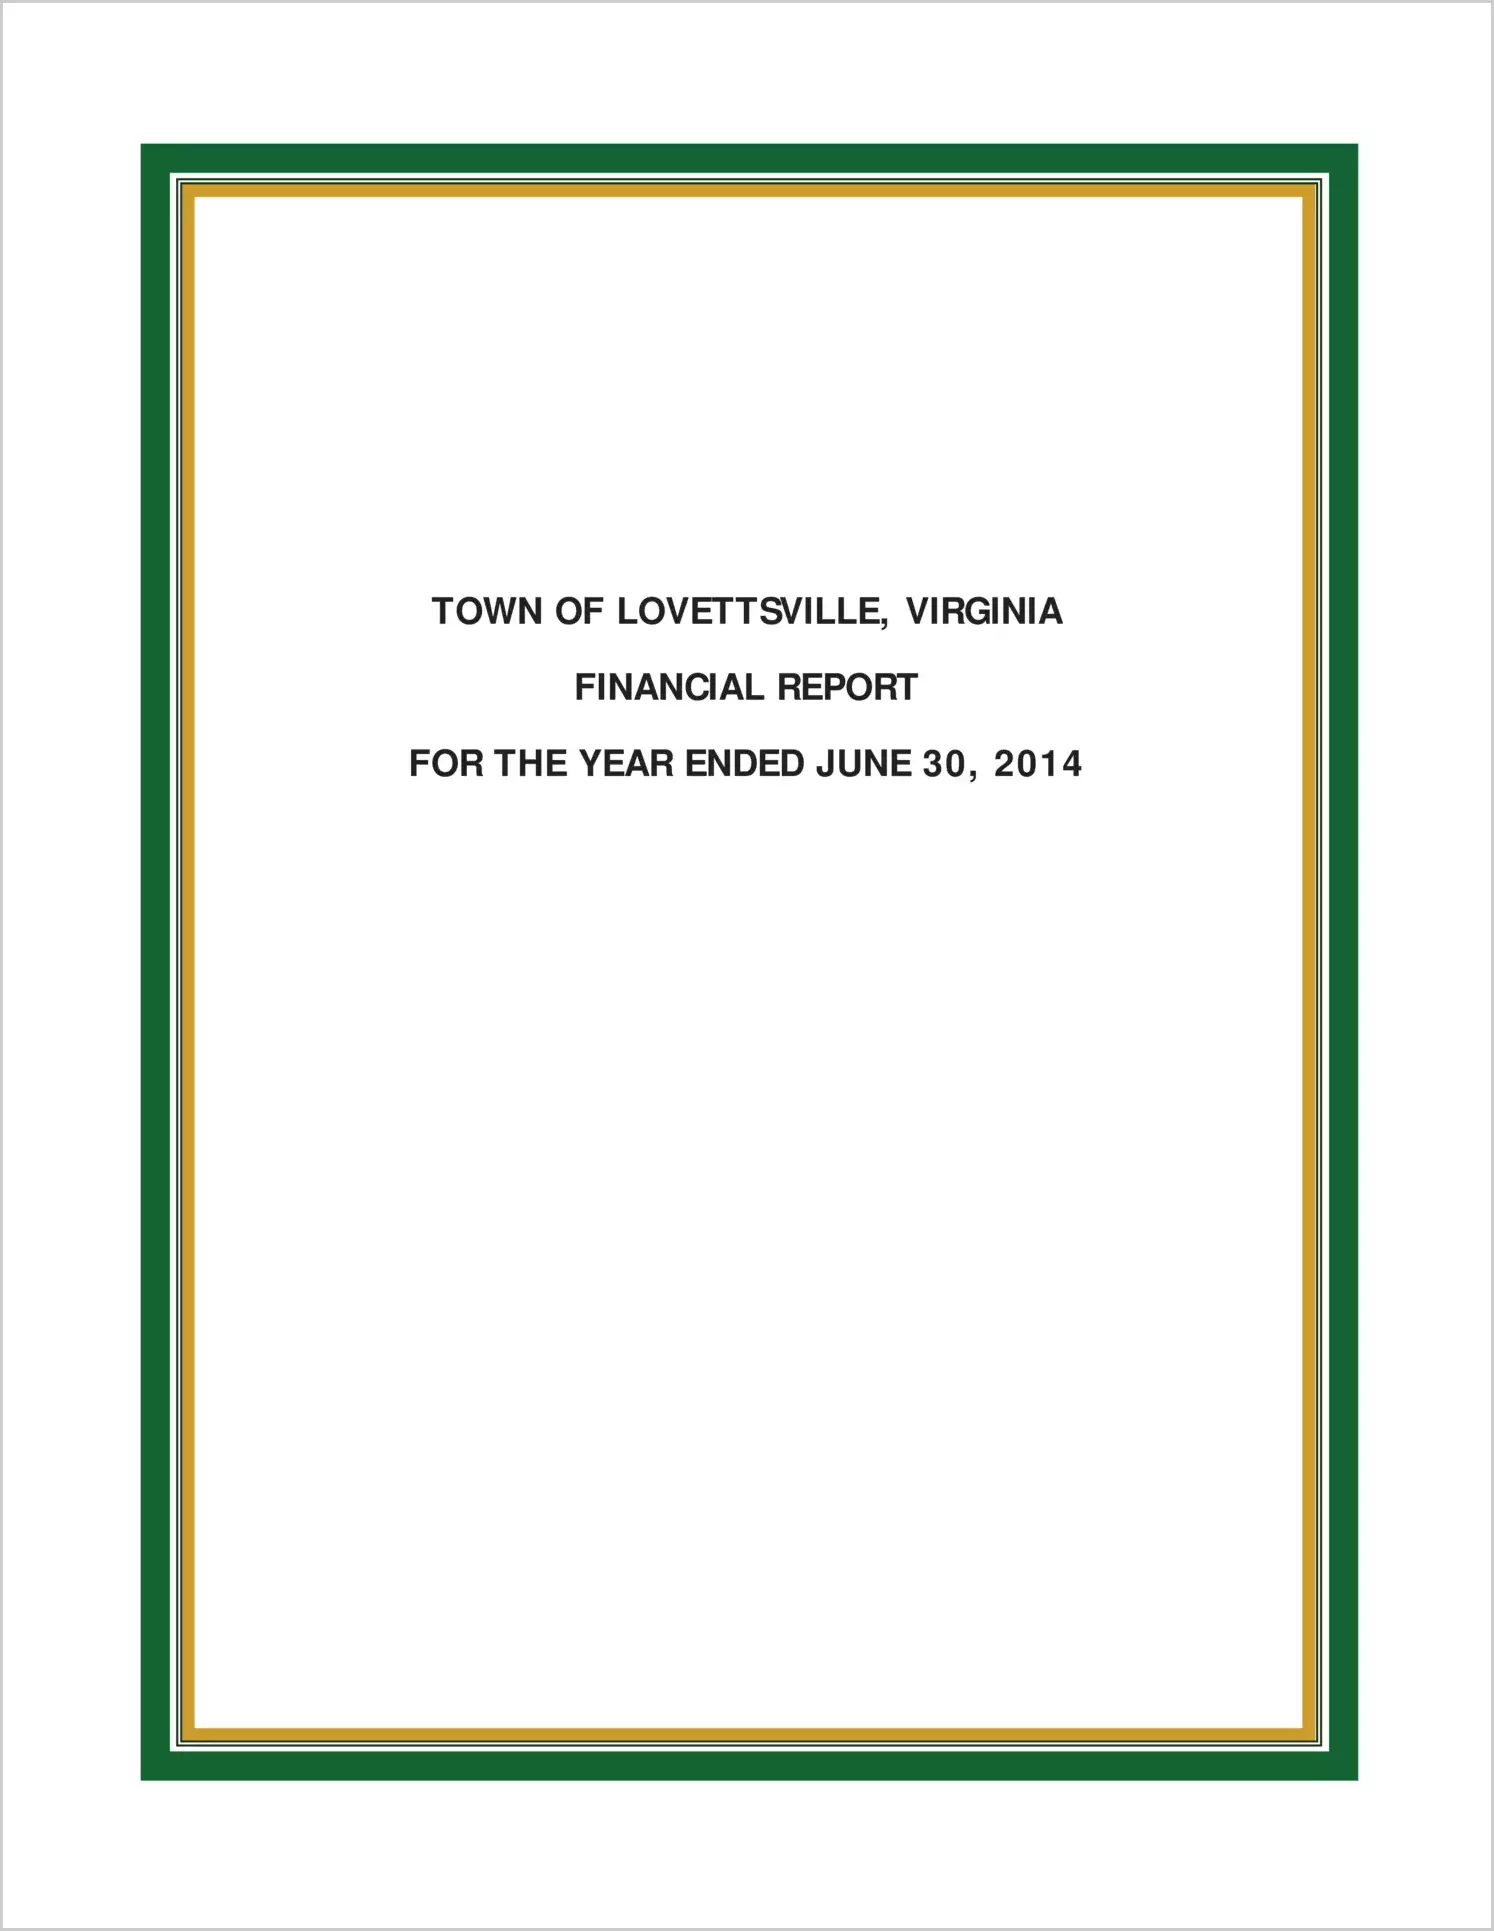 2014 Annual Financial Report for Town of Lovettsville